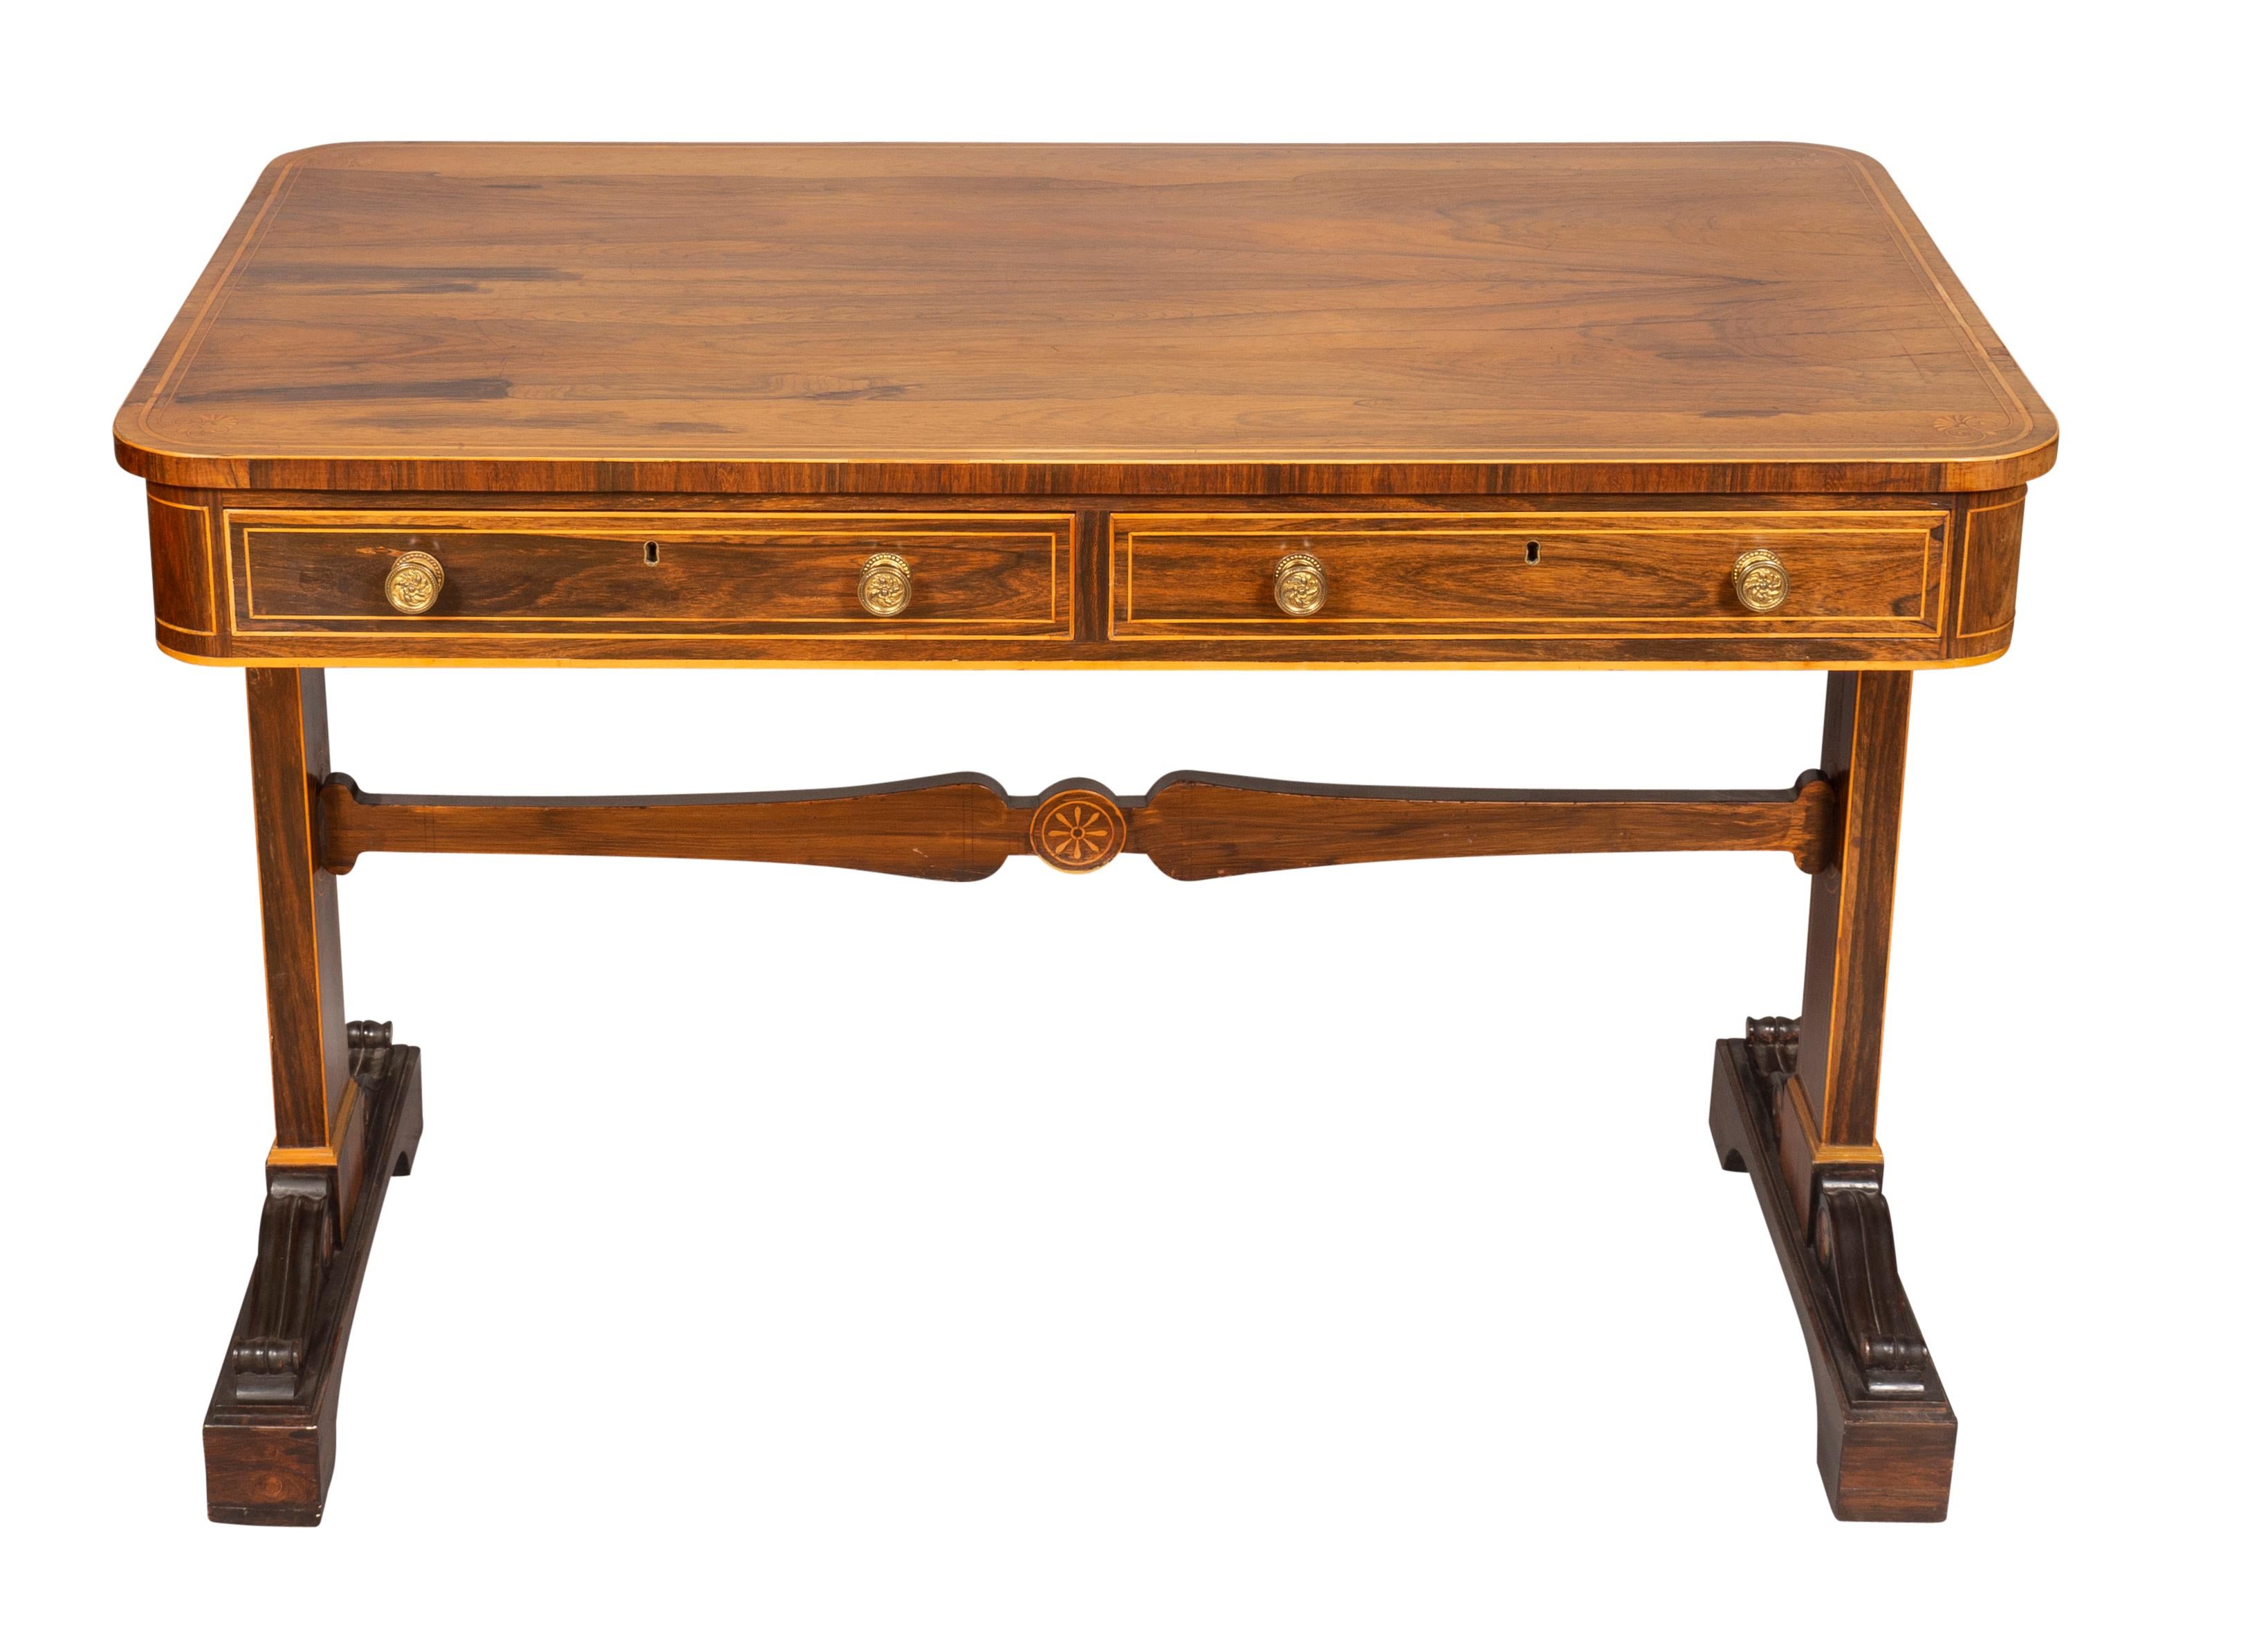 Rectangular top with rounded corners and string inlay above a pair of drawers with opposing false drawers raised on a trestle base with roundel satinwood inlays. Shaped stretcher and legs with carved volutes.